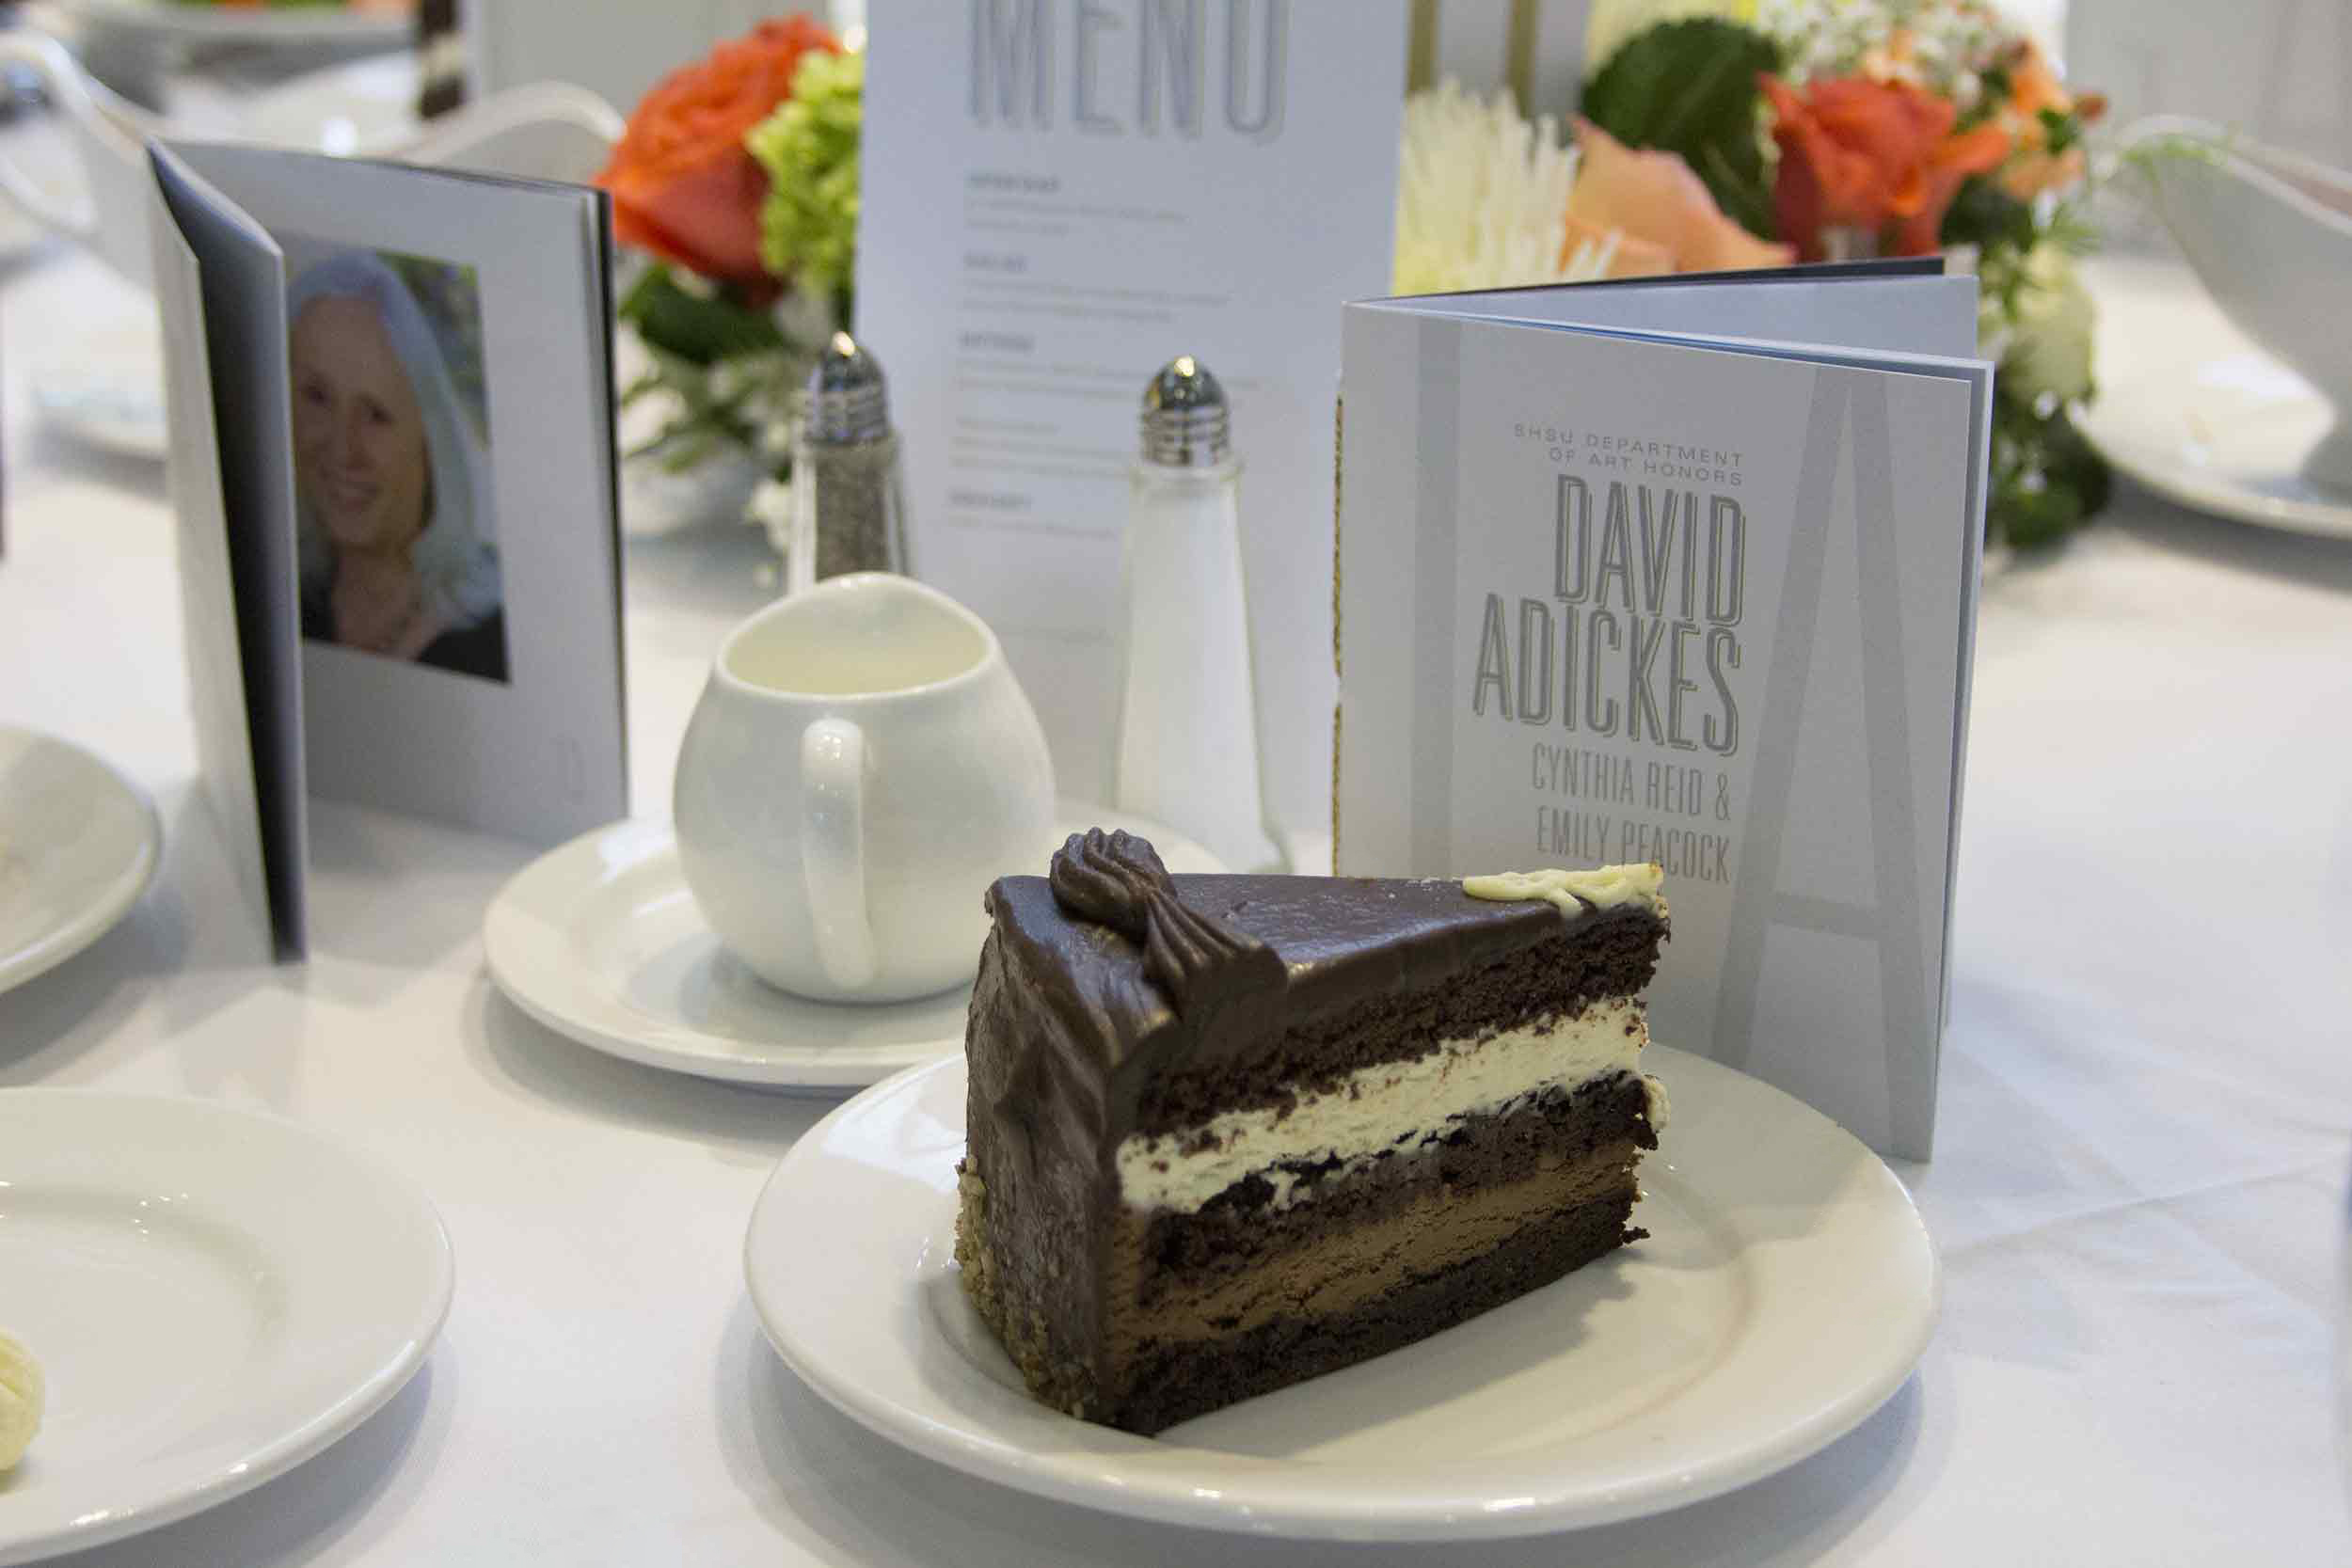 Triple layer choclate cake on a white plate with white linens with gala program and menu on a table adjacent to a vibrant floral arrangement